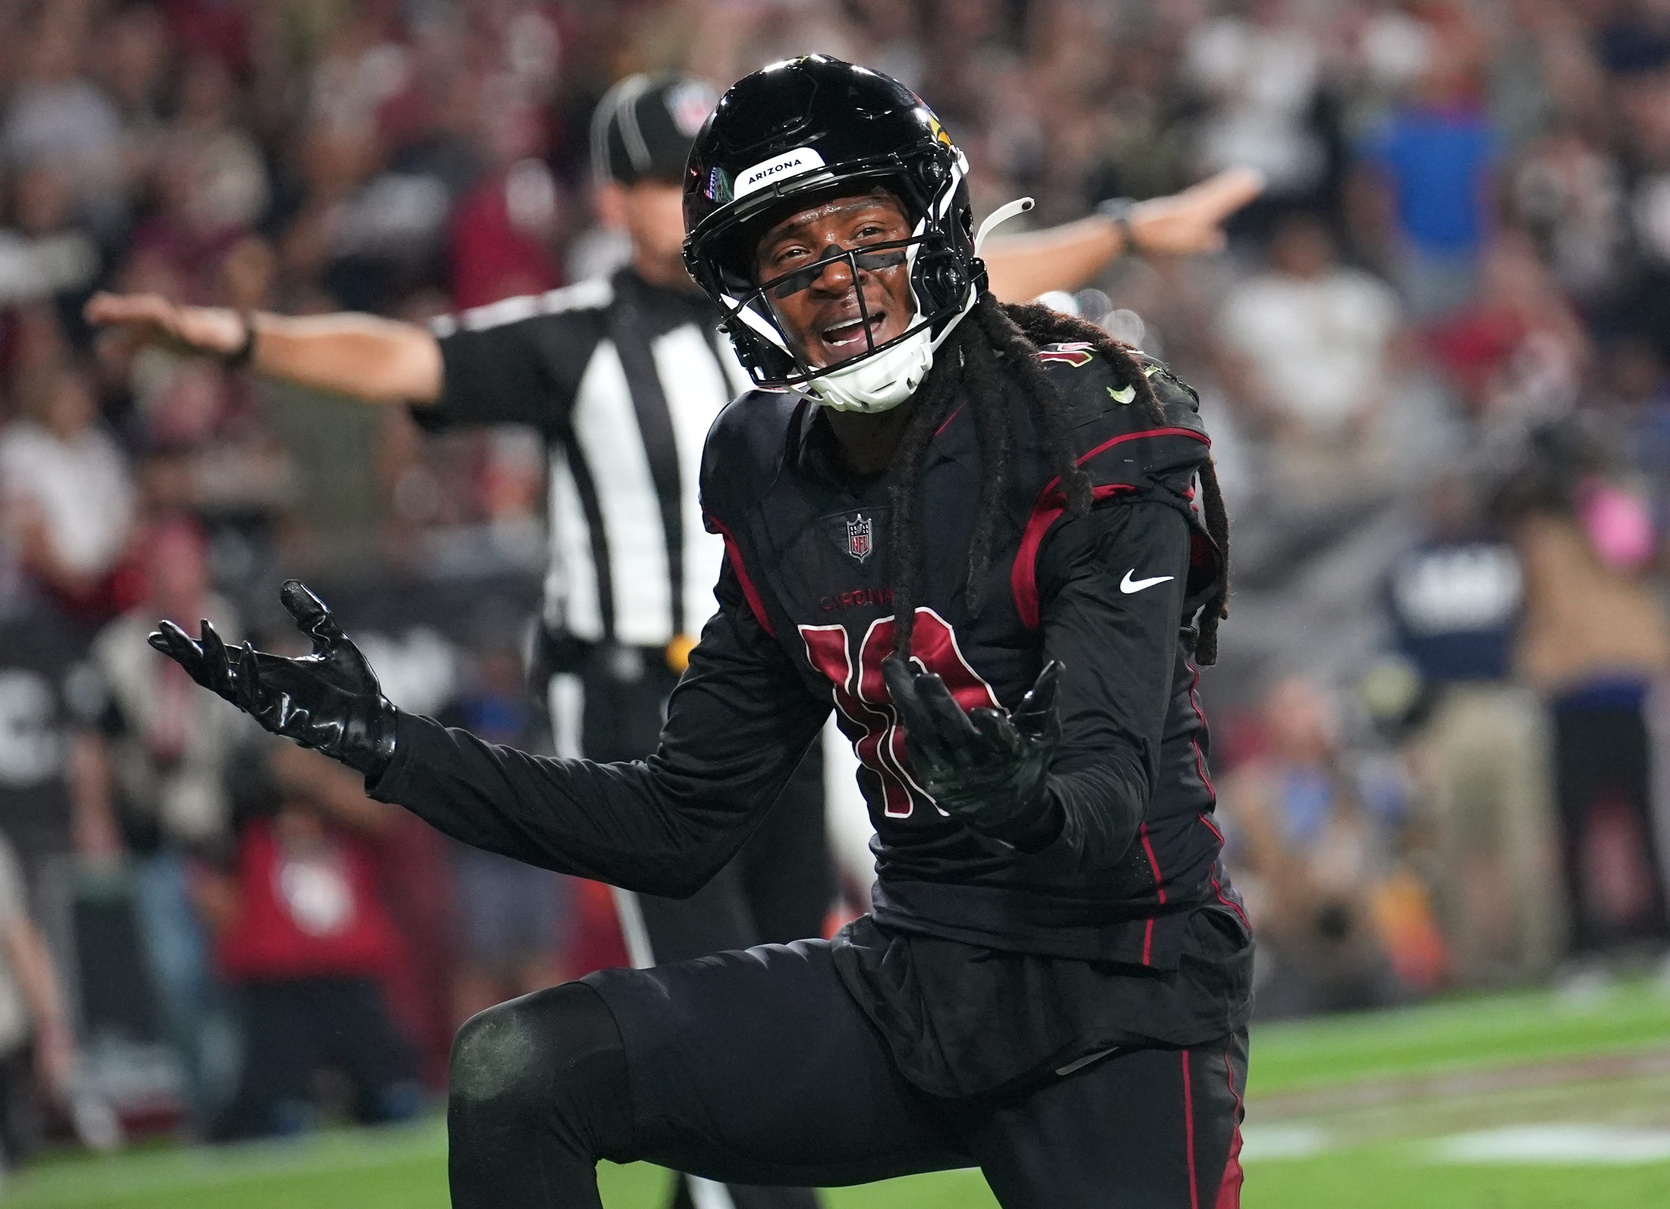 Report: Bills want DeAndre Hopkins but 'are not going to pay